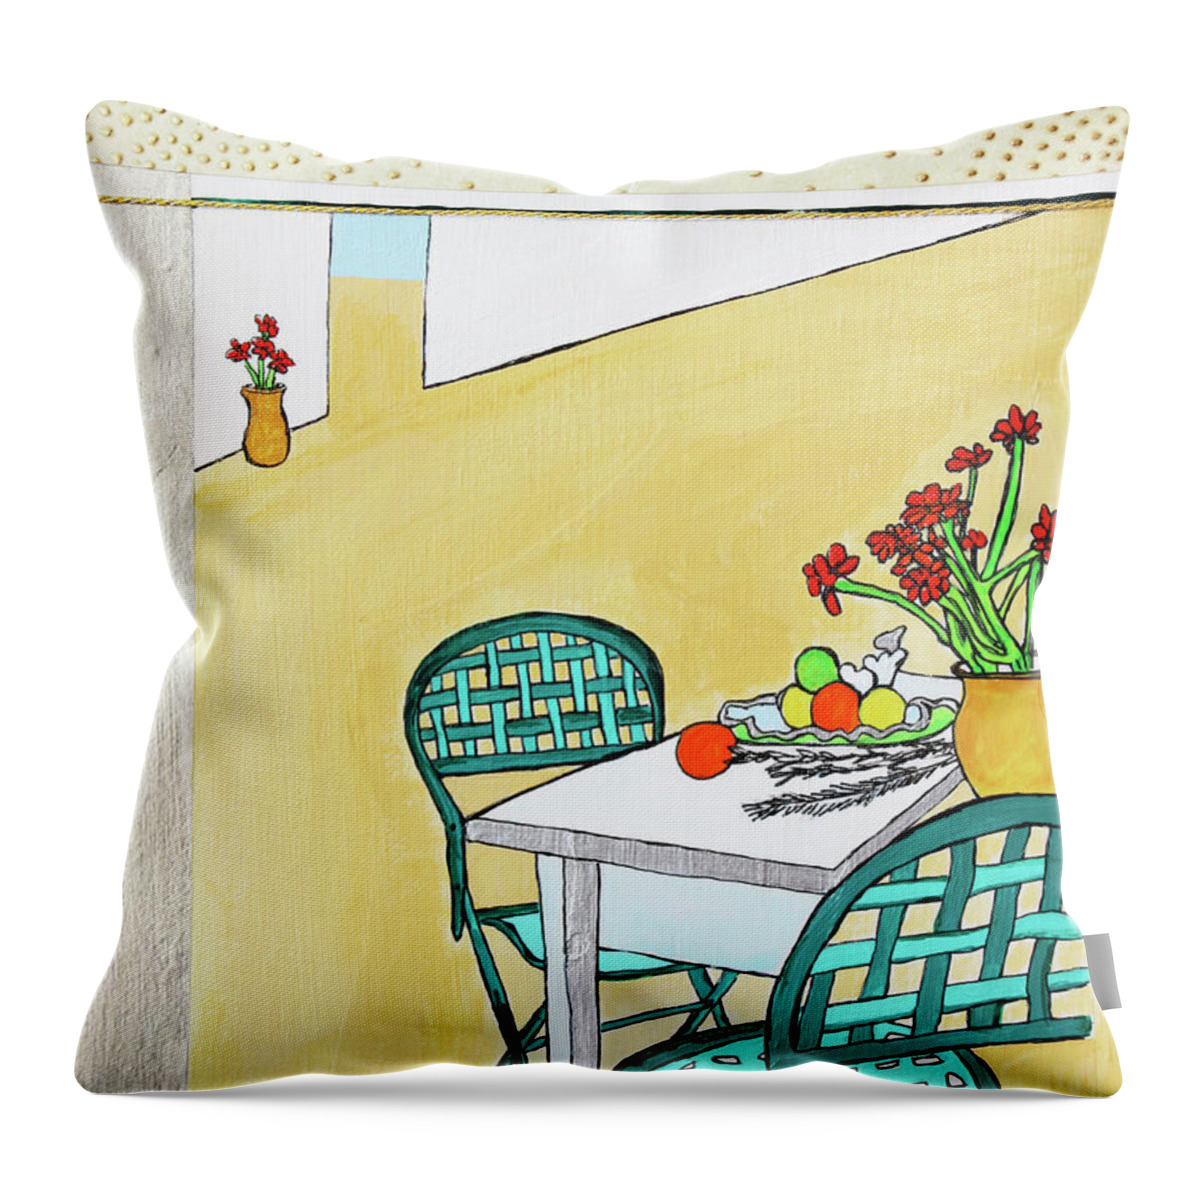 Arrangement Throw Pillow featuring the photograph Fruit And Flowers On Patio Table by Ikon Ikon Images